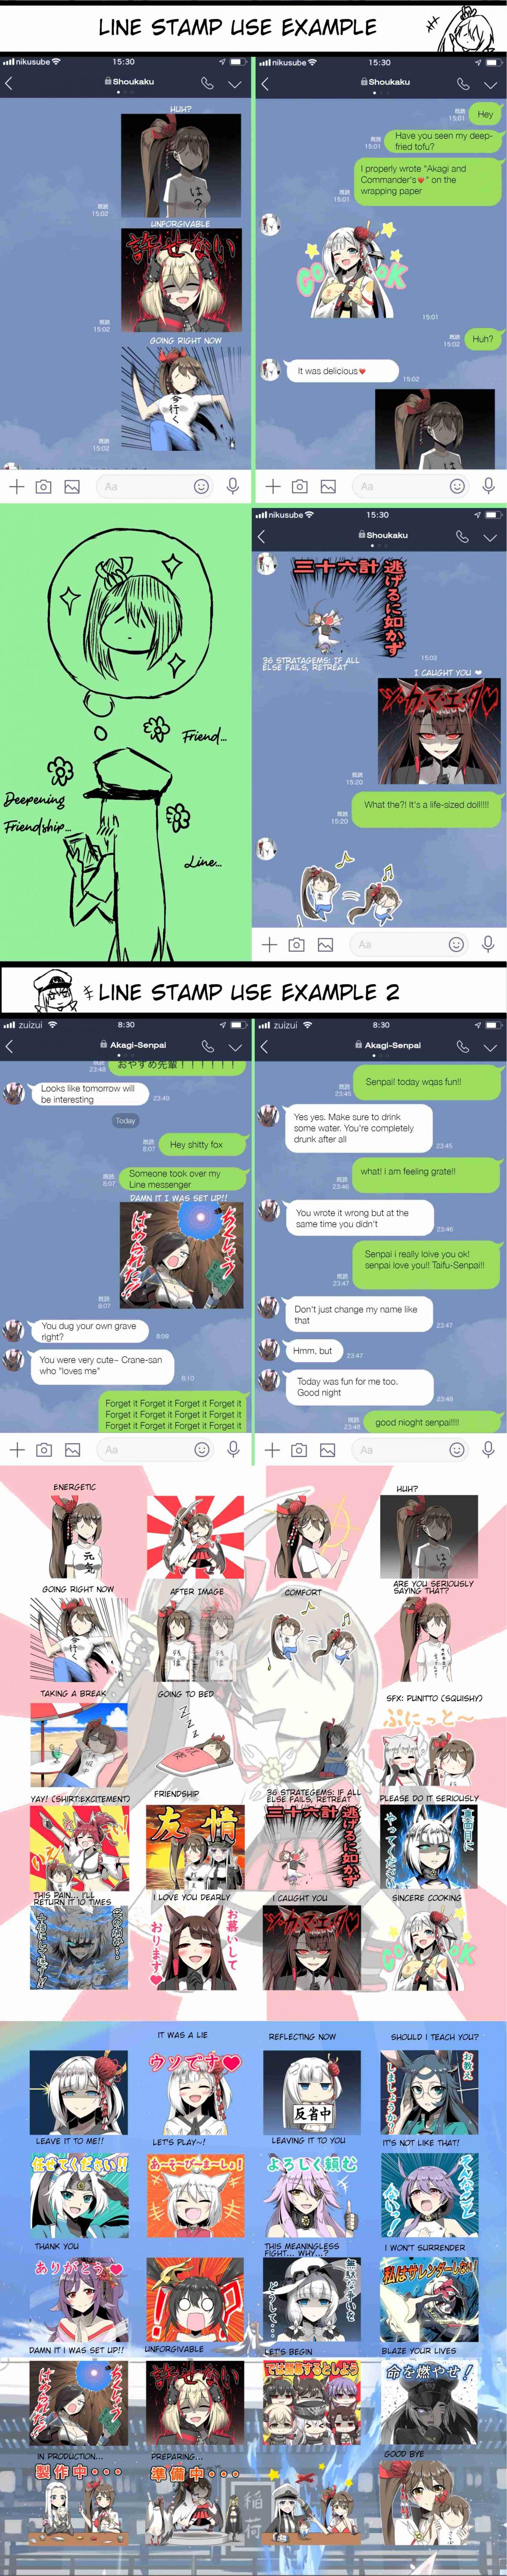 Azur Lane: A Journal Ch. 12.5 J( ´.`) and her cheery friends